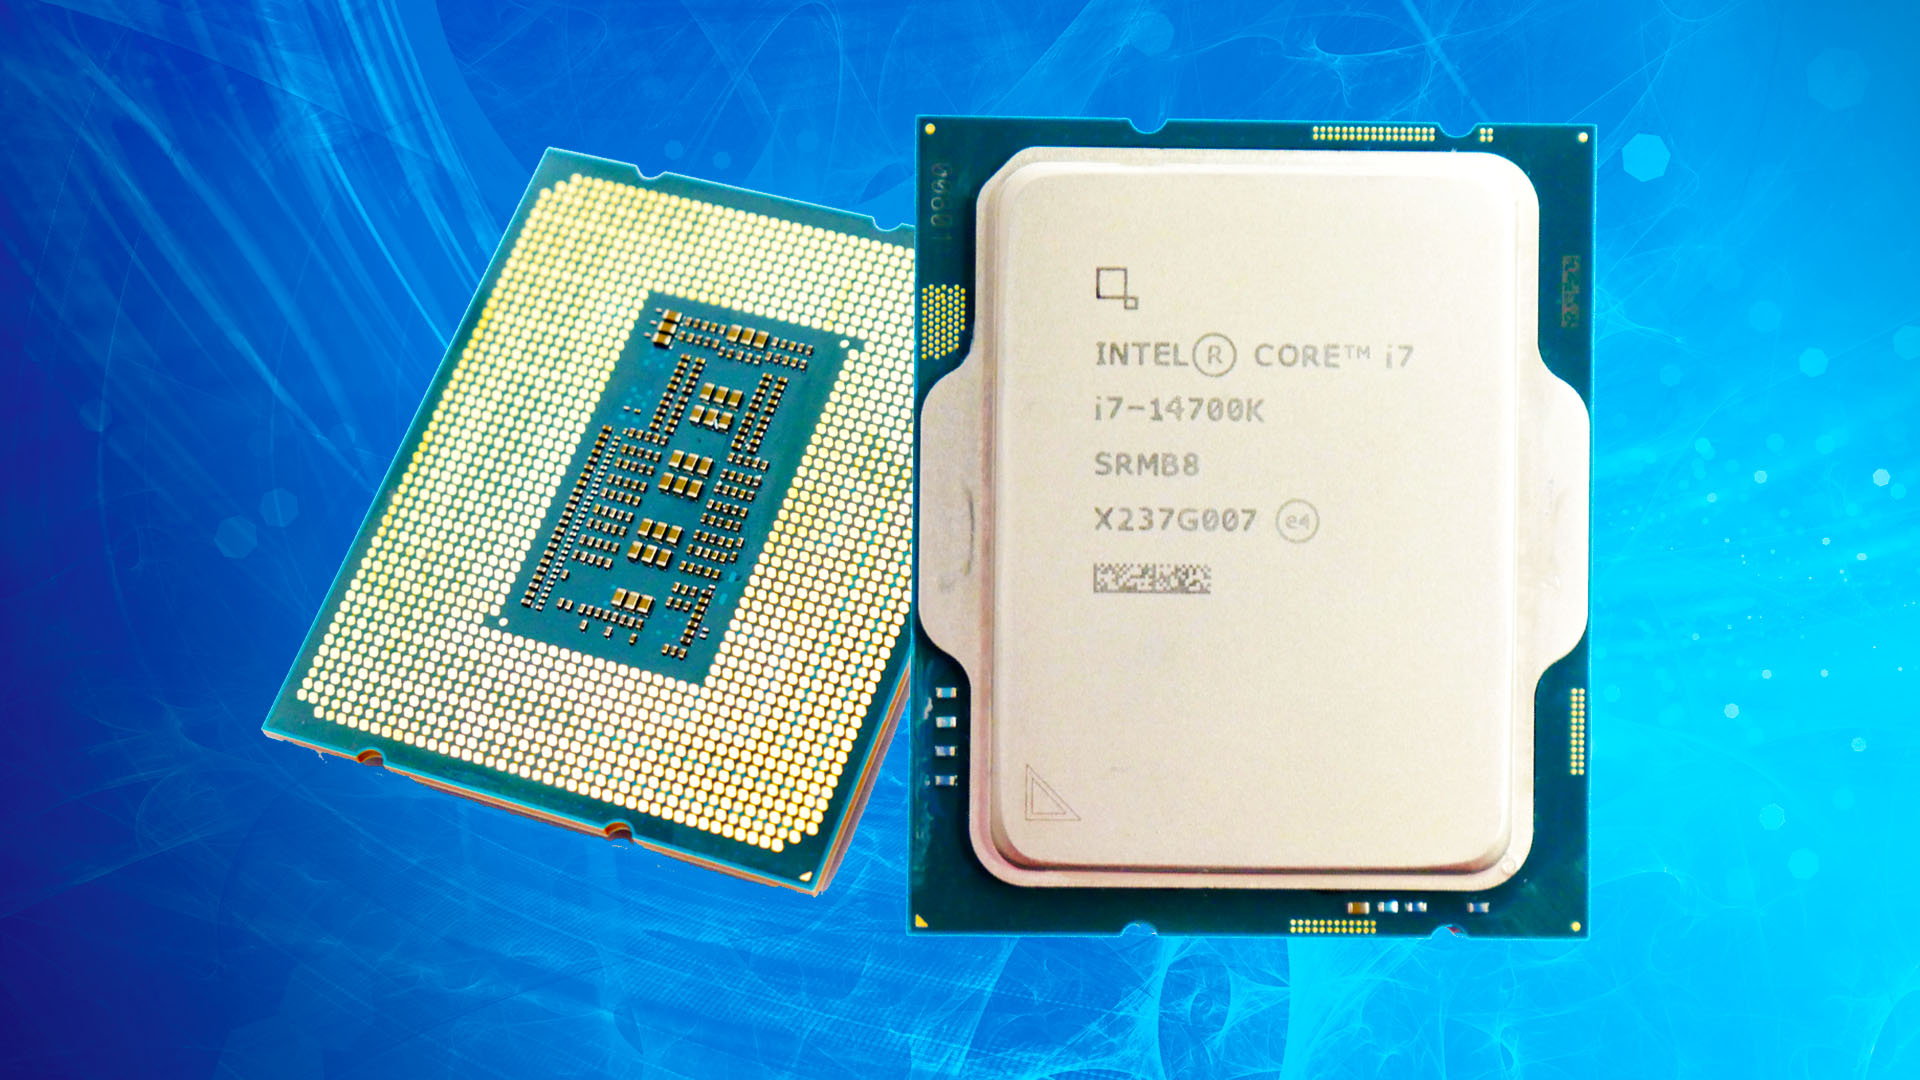 Intel 14th gen specs, price, release date, and latest news